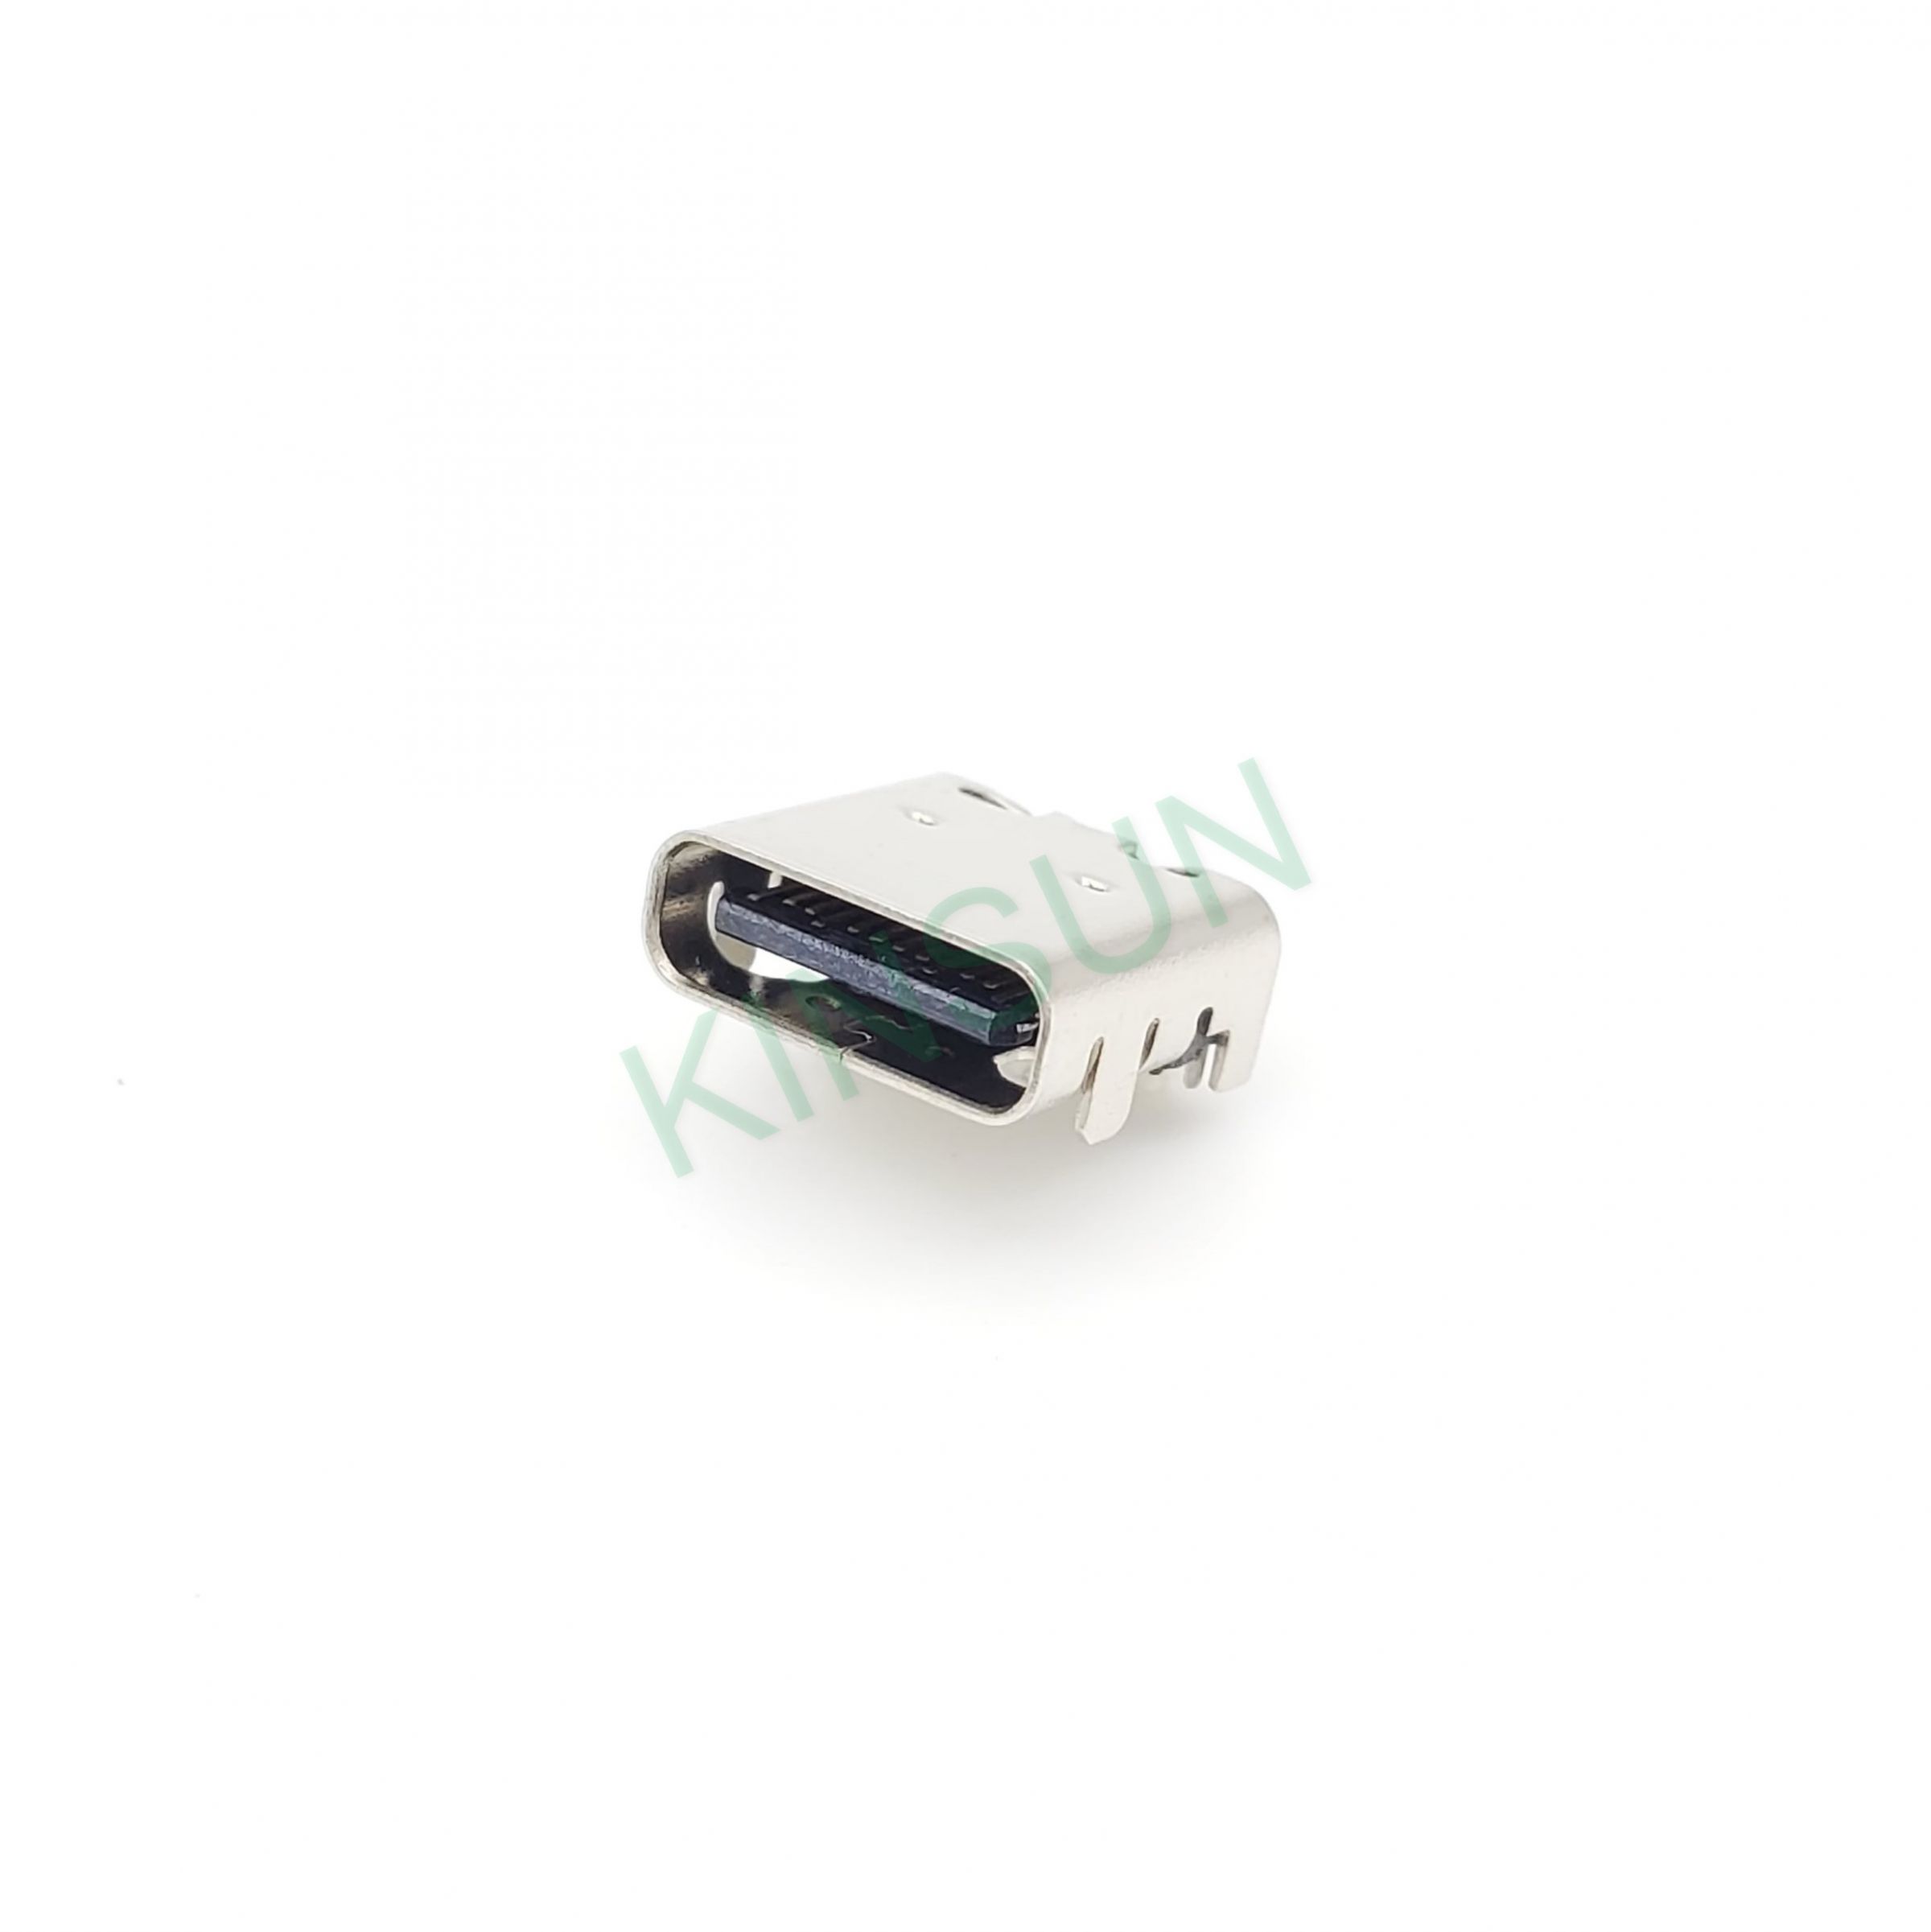 USB Type-C SMD 24Pin Connector - USB C 2.0/USB C 3.0 Female Receptacle, 35  Years Modular Jacks & Waterproof Connectors Solutions Provider